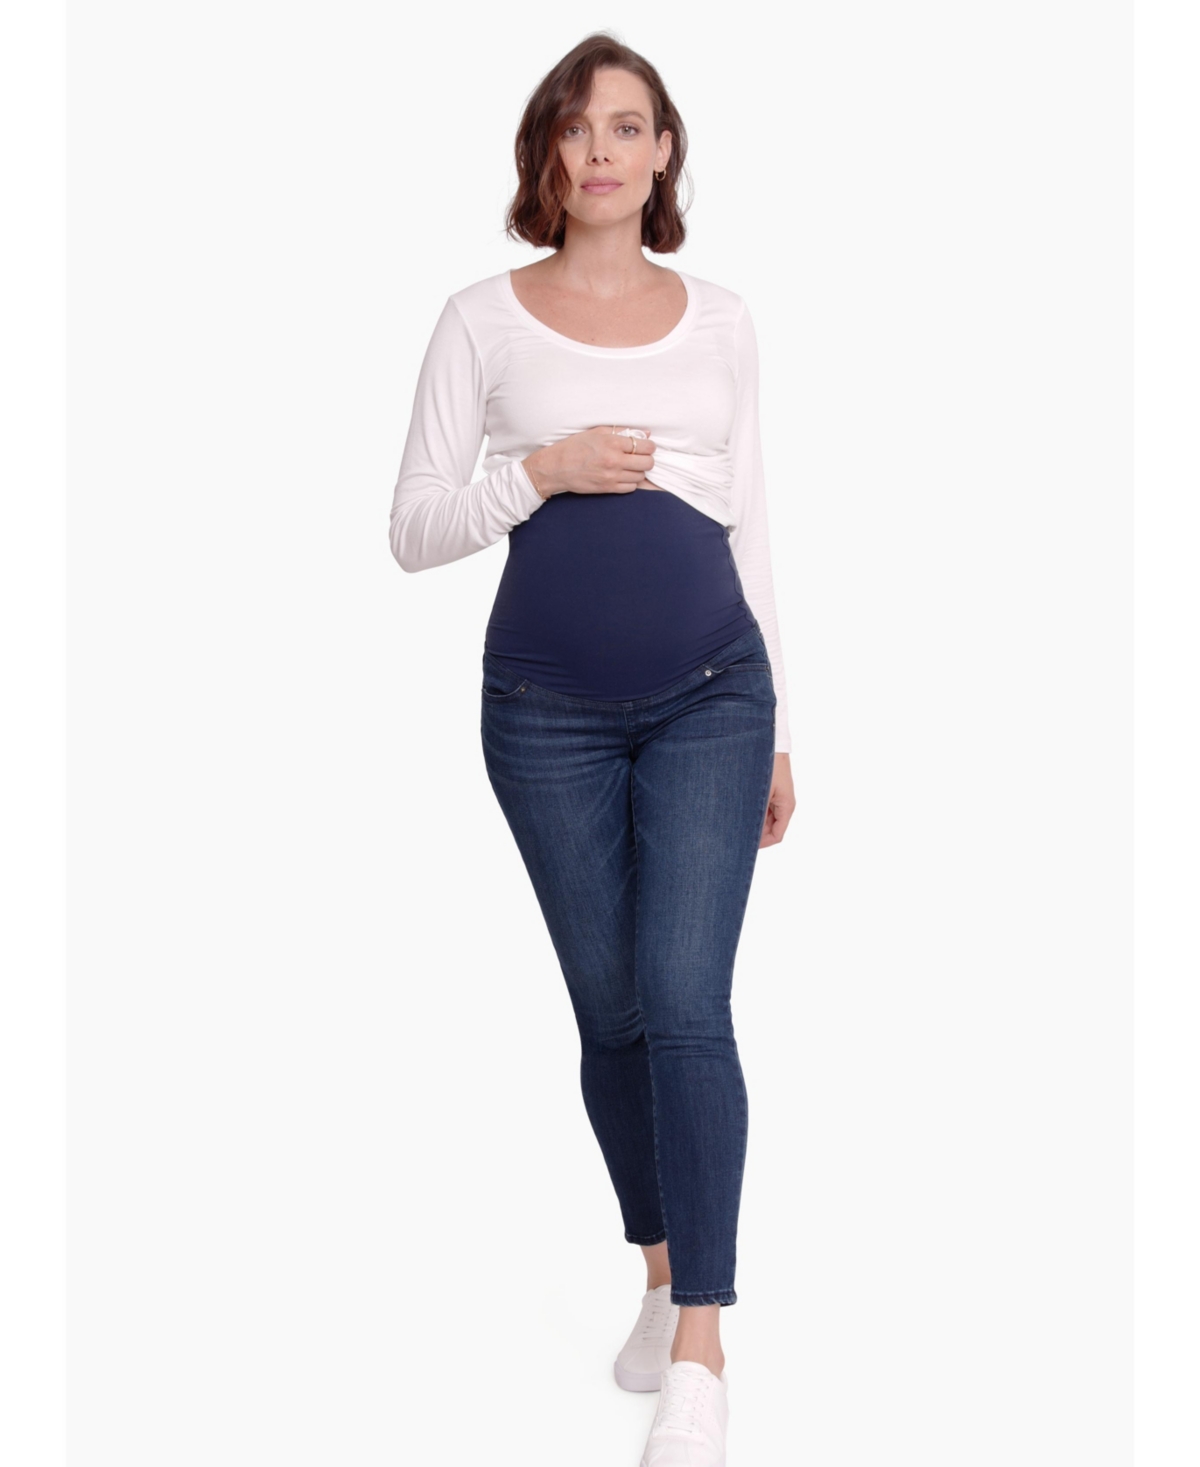  Women's Maternity Maternity Skinny Jean With Crossover Panel